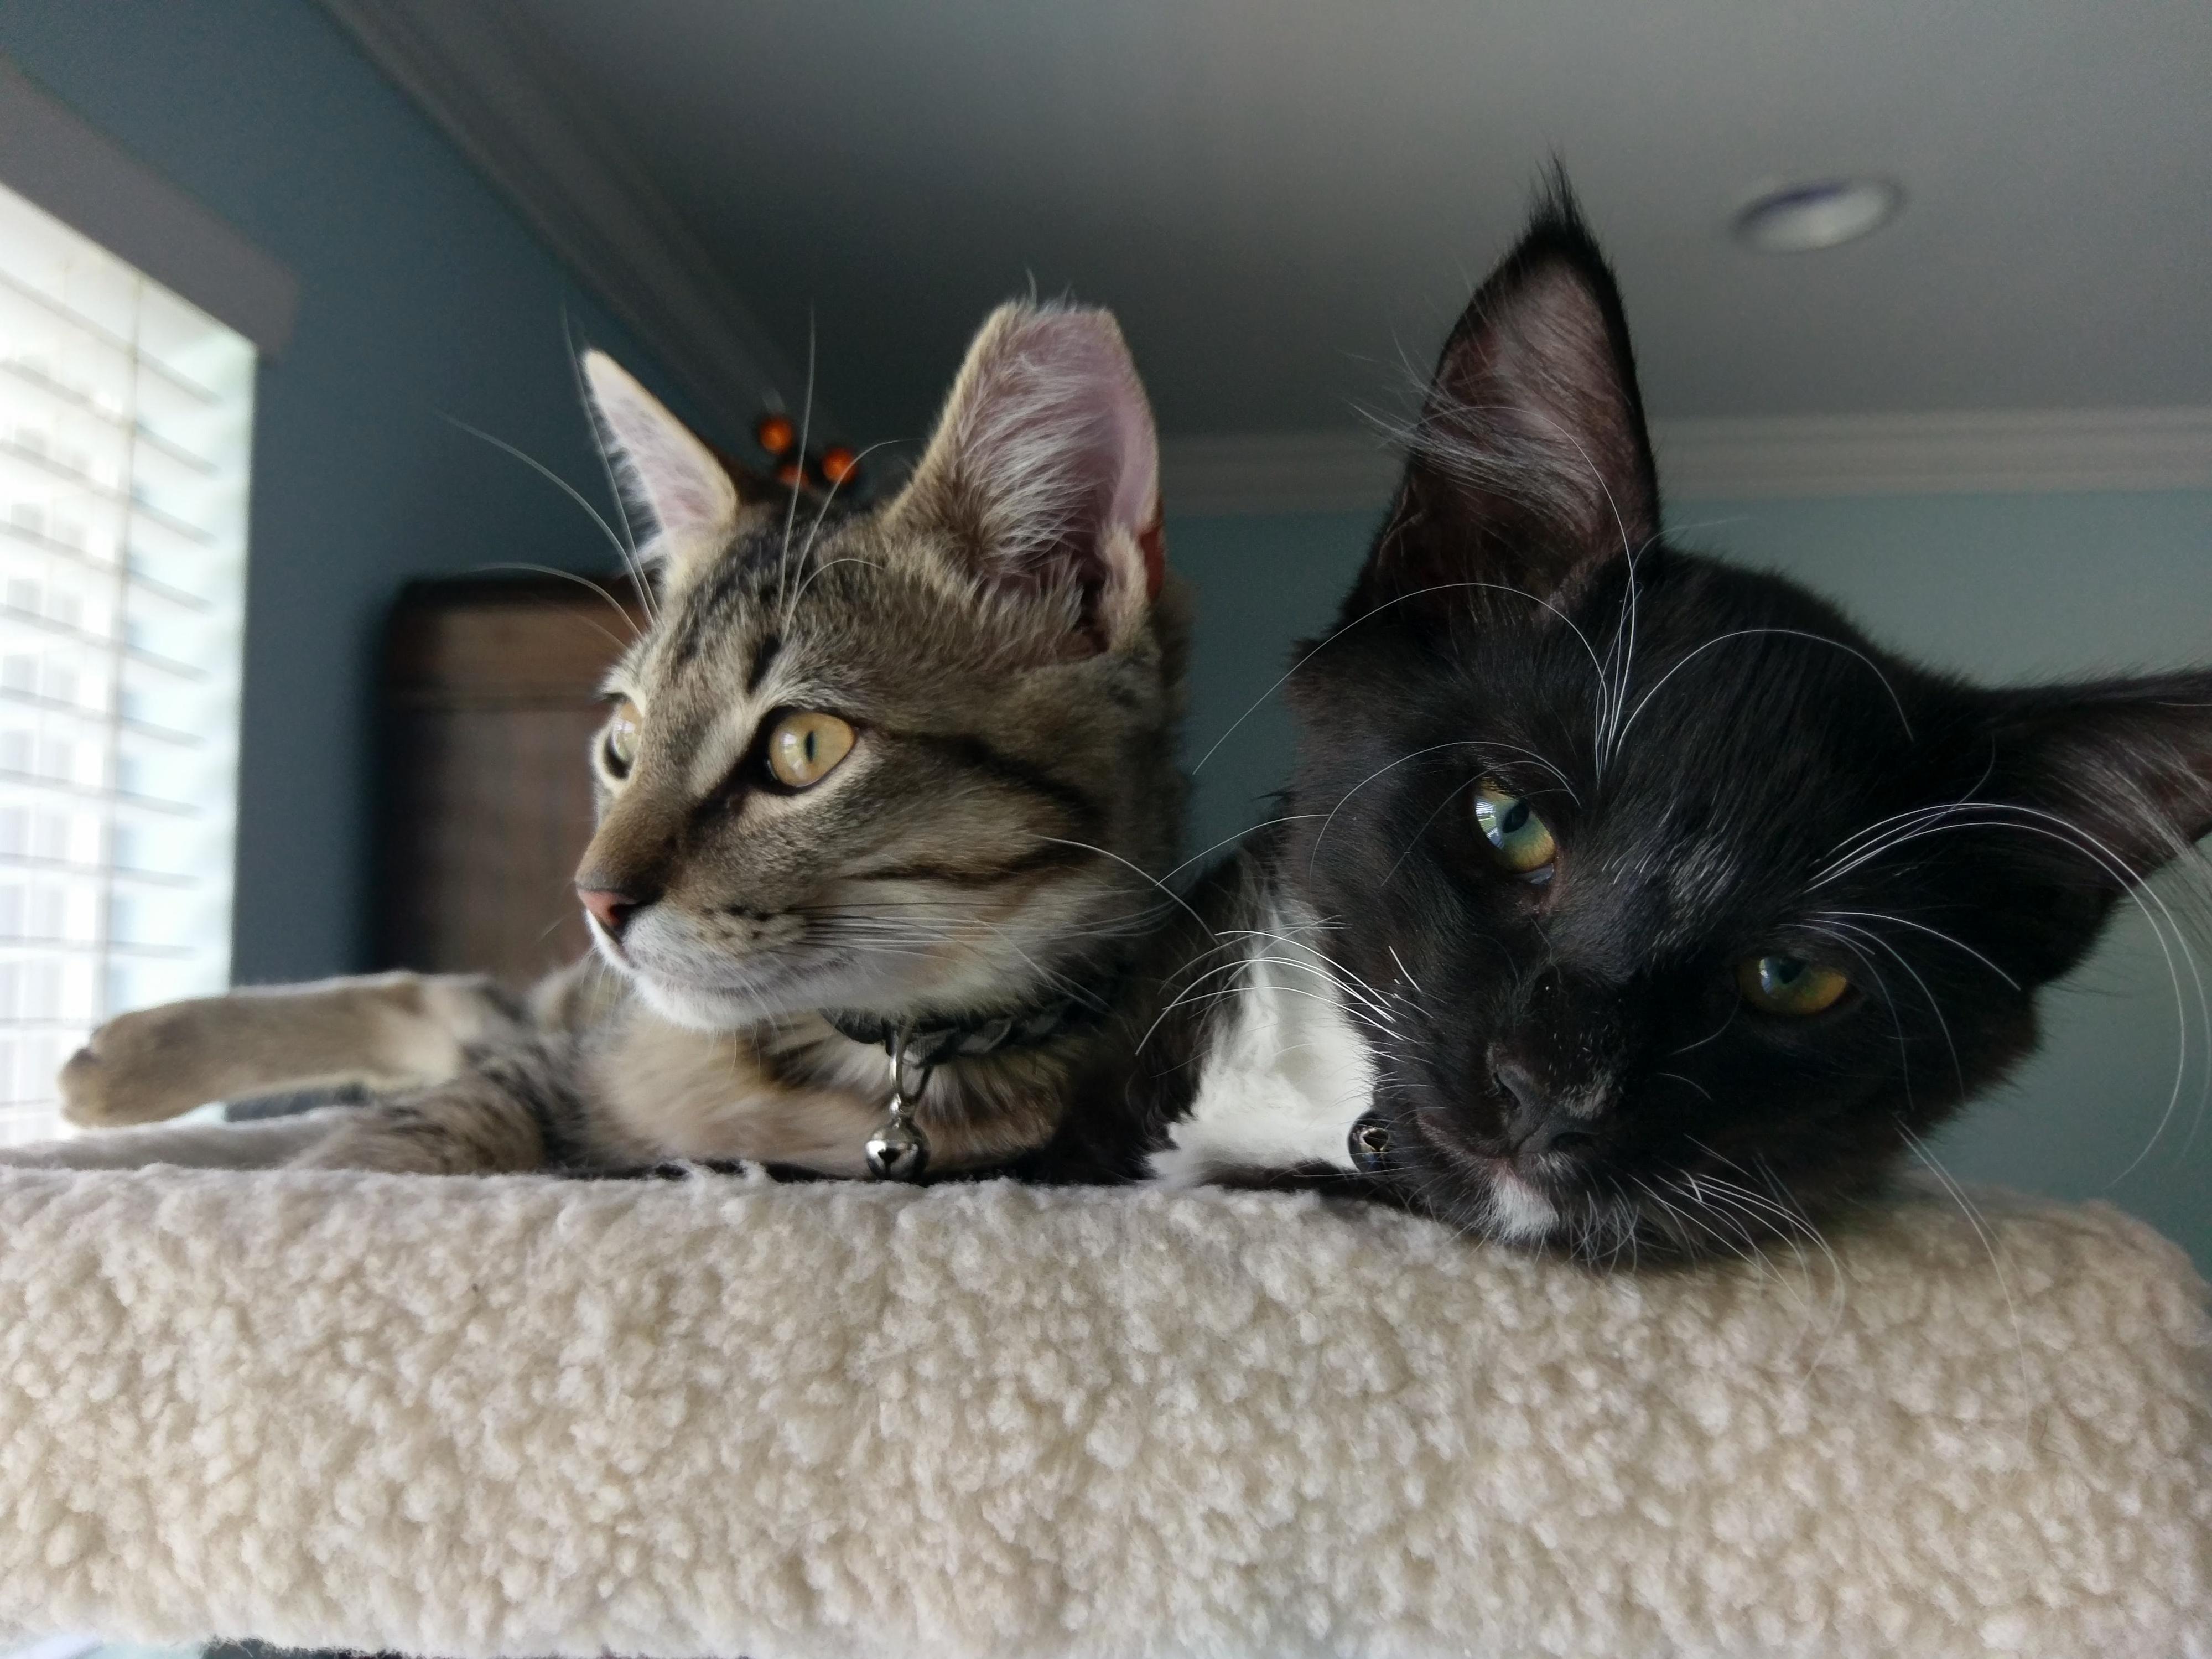 Theres barely room for two at the top of the cat tree but these guys make it work